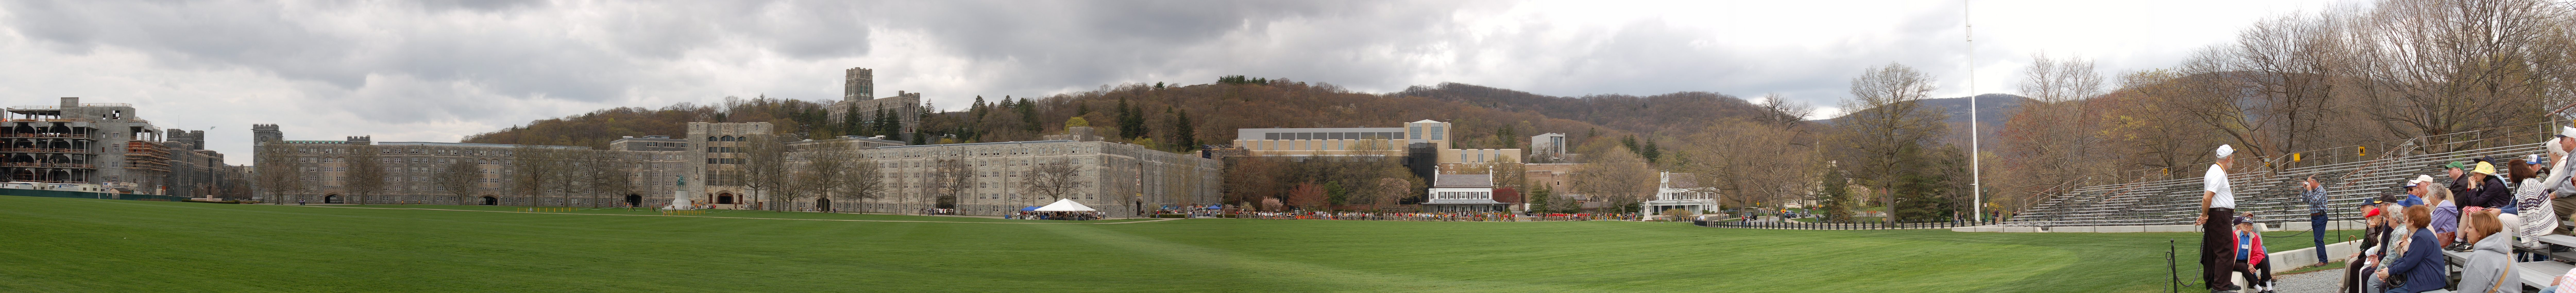 West Point 2007